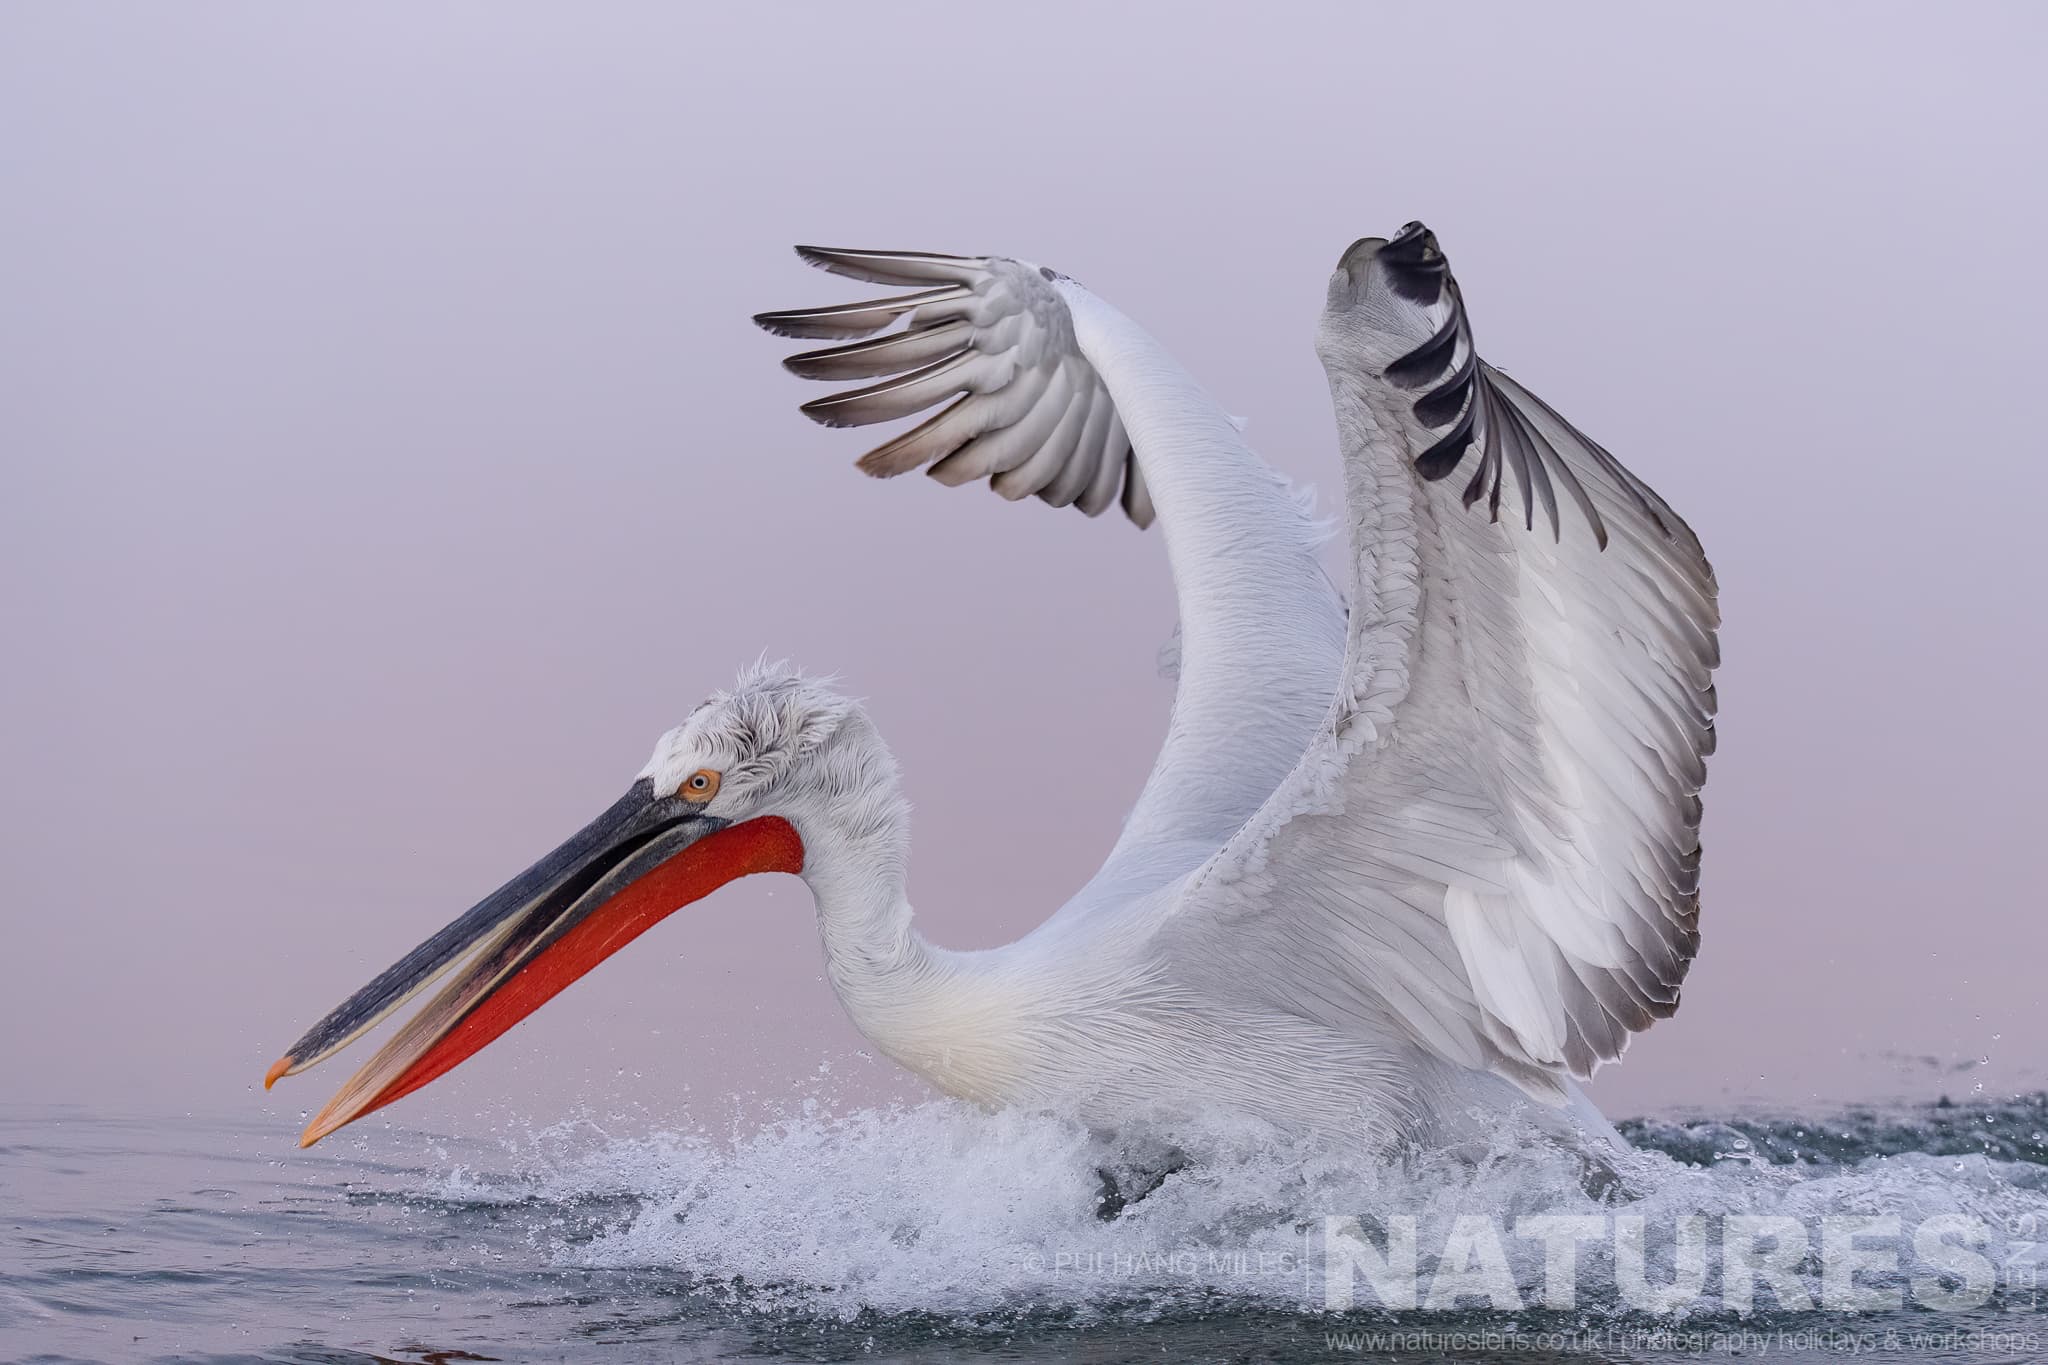 One of the Dalmatian Pelicans of Greece makes a splash as it lands on the waters of Lake Kerkini